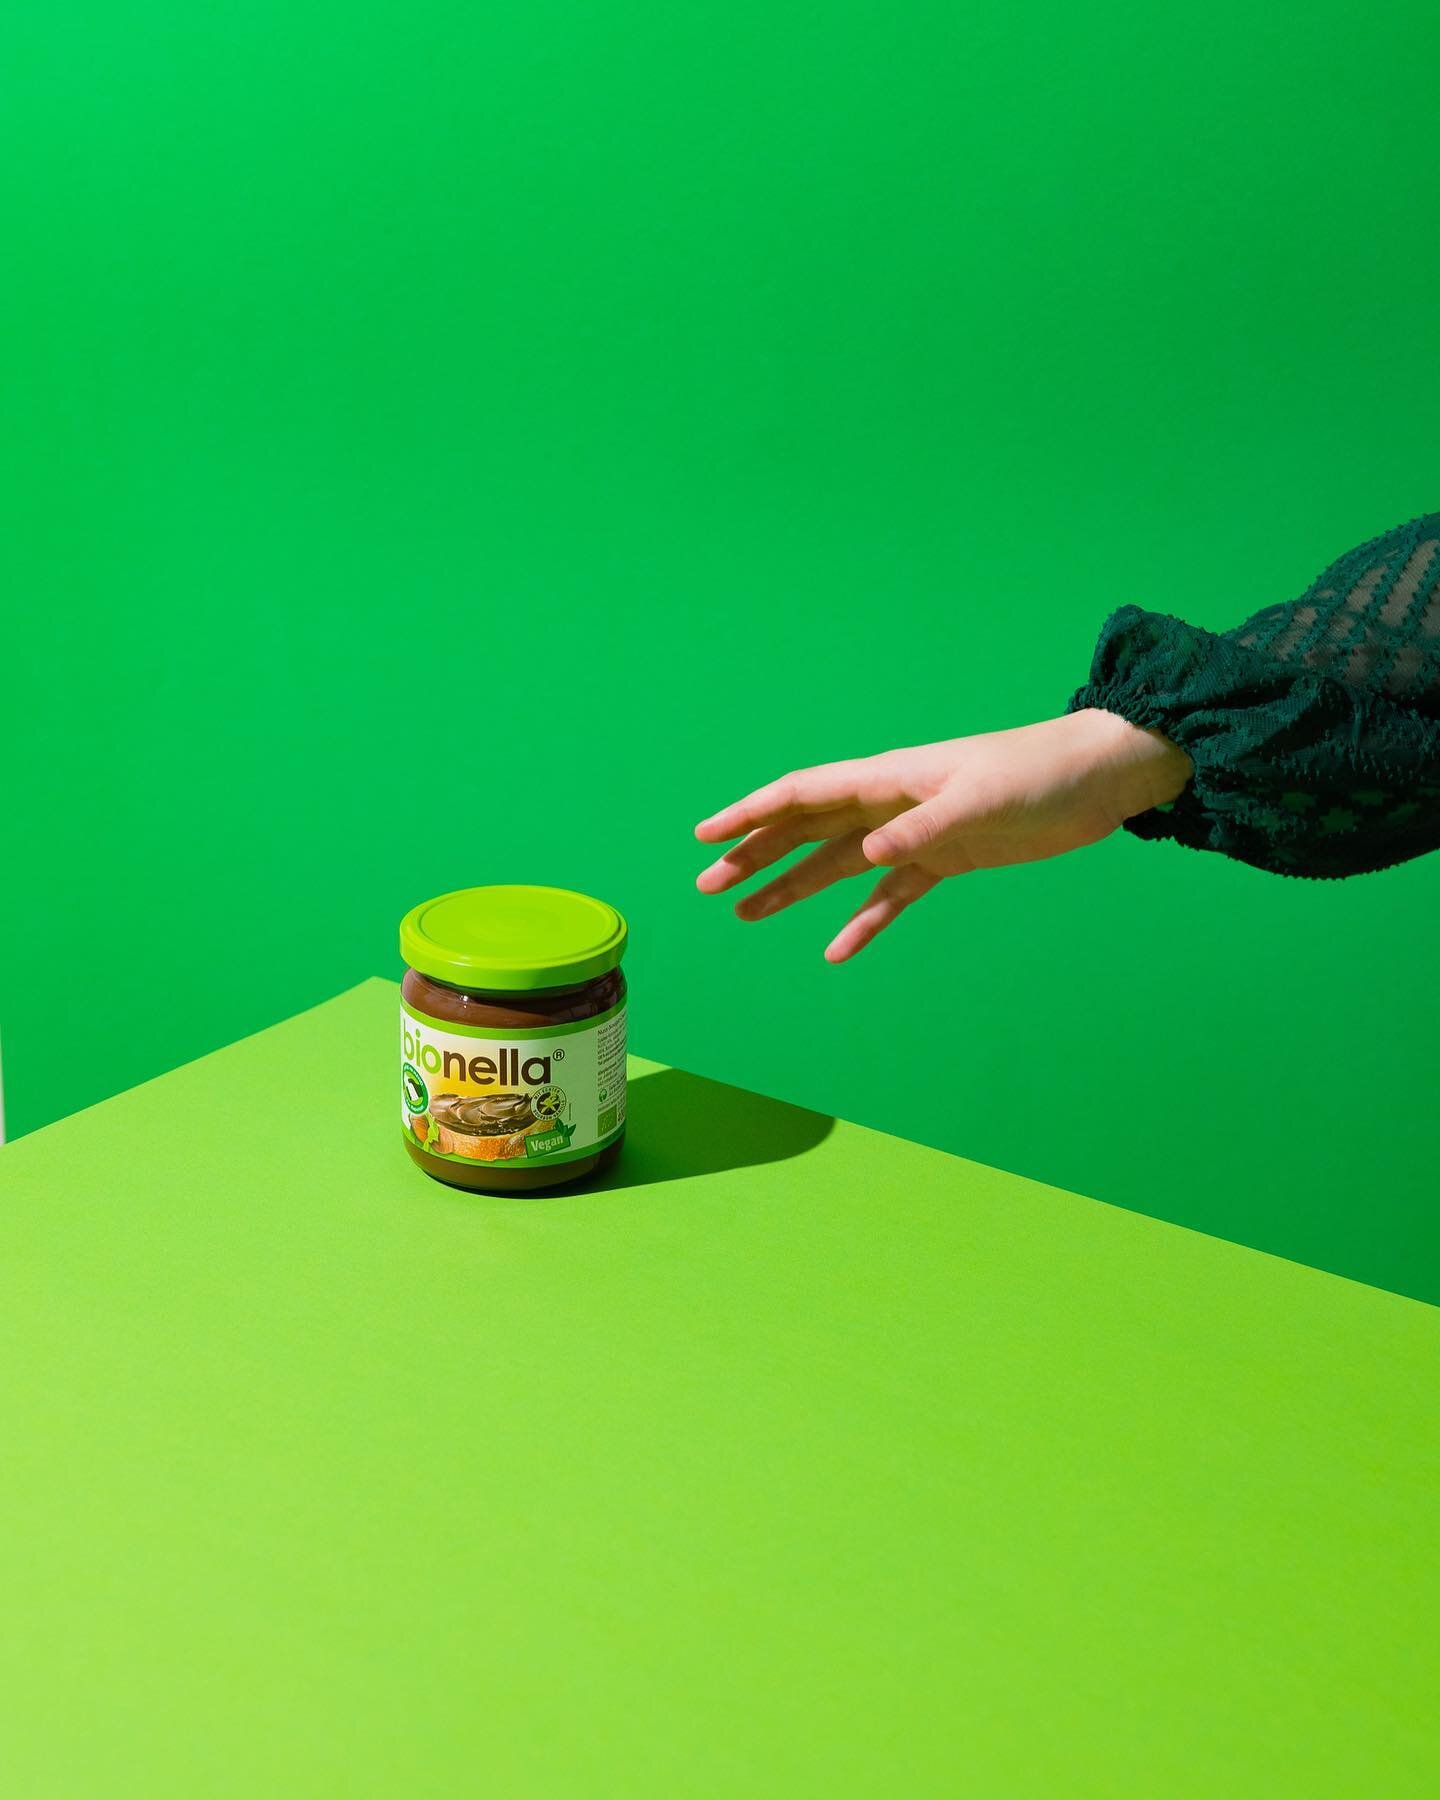 Product photography involving hands. 👋🏼

For @bionella.fair.vegan we wanted to add a human element to the photos. 🕺

While there was no model involved in this shooting, we thought we can use our own hands. 🙌🏼 (Mostly Anna&rsquo;s)

#productphoto